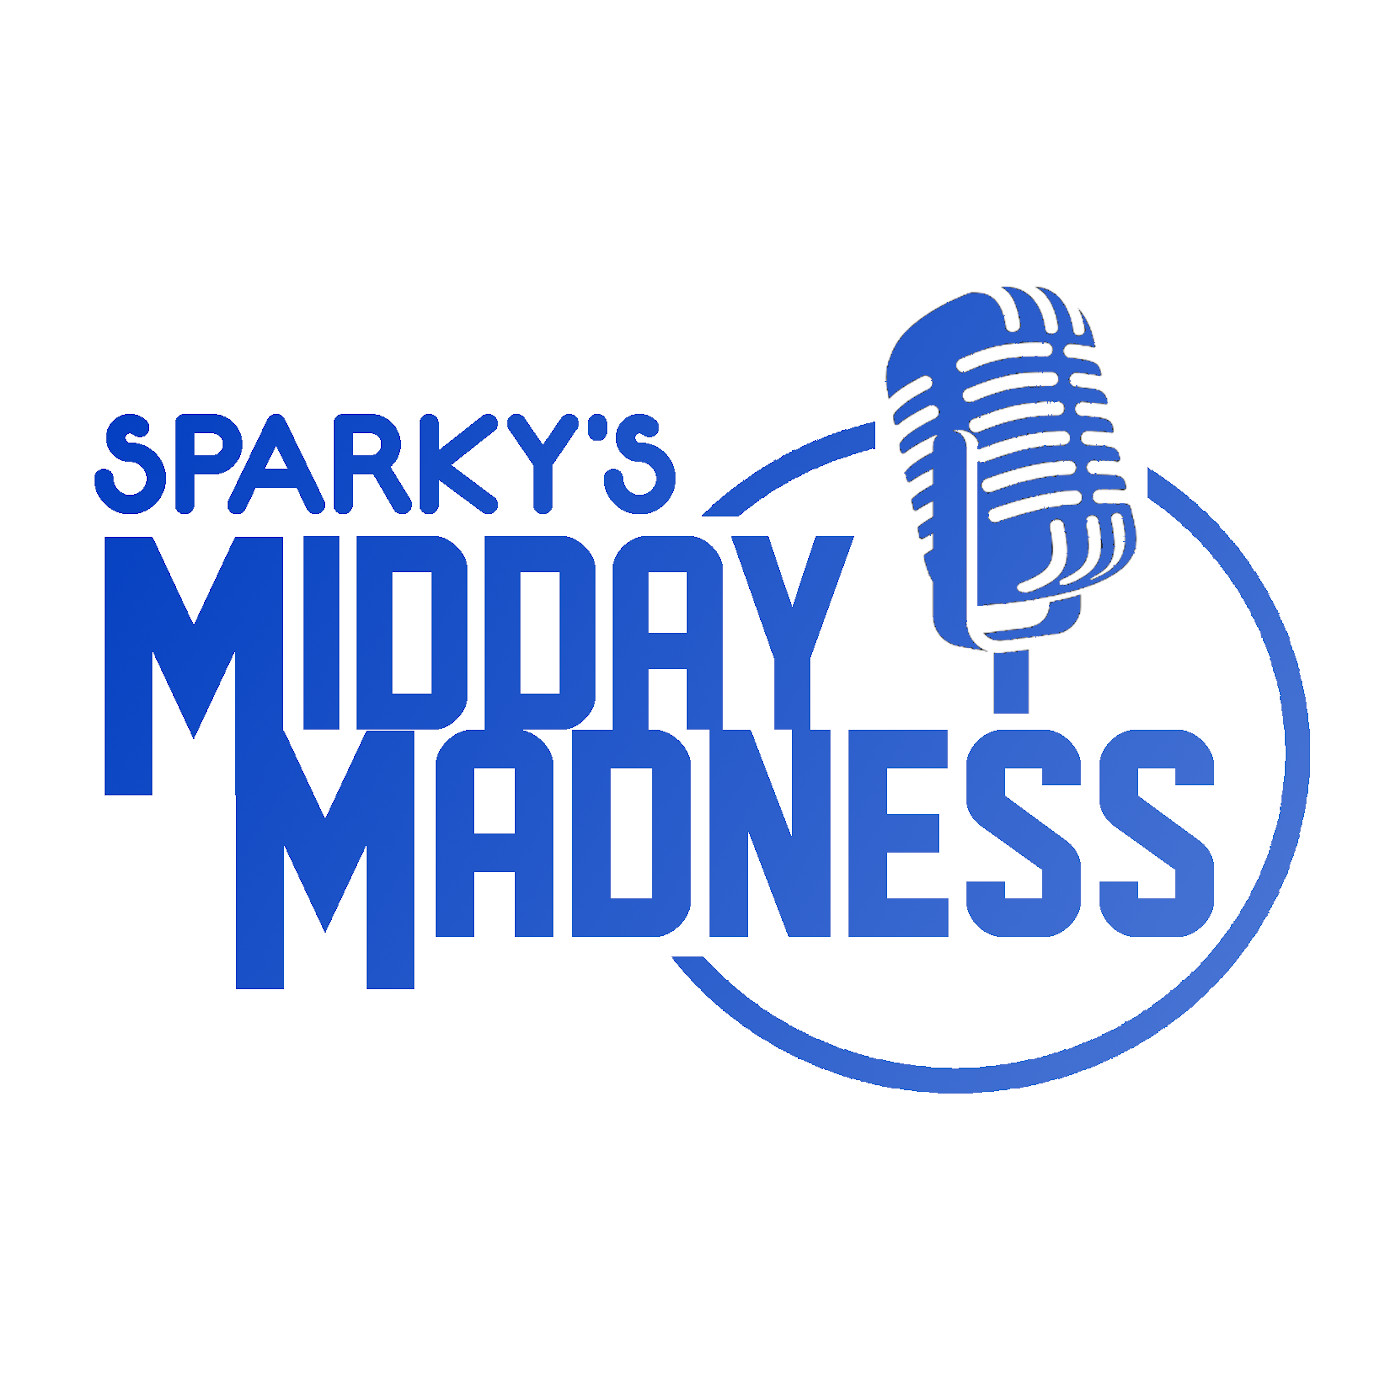 Sparky's Midday Madness